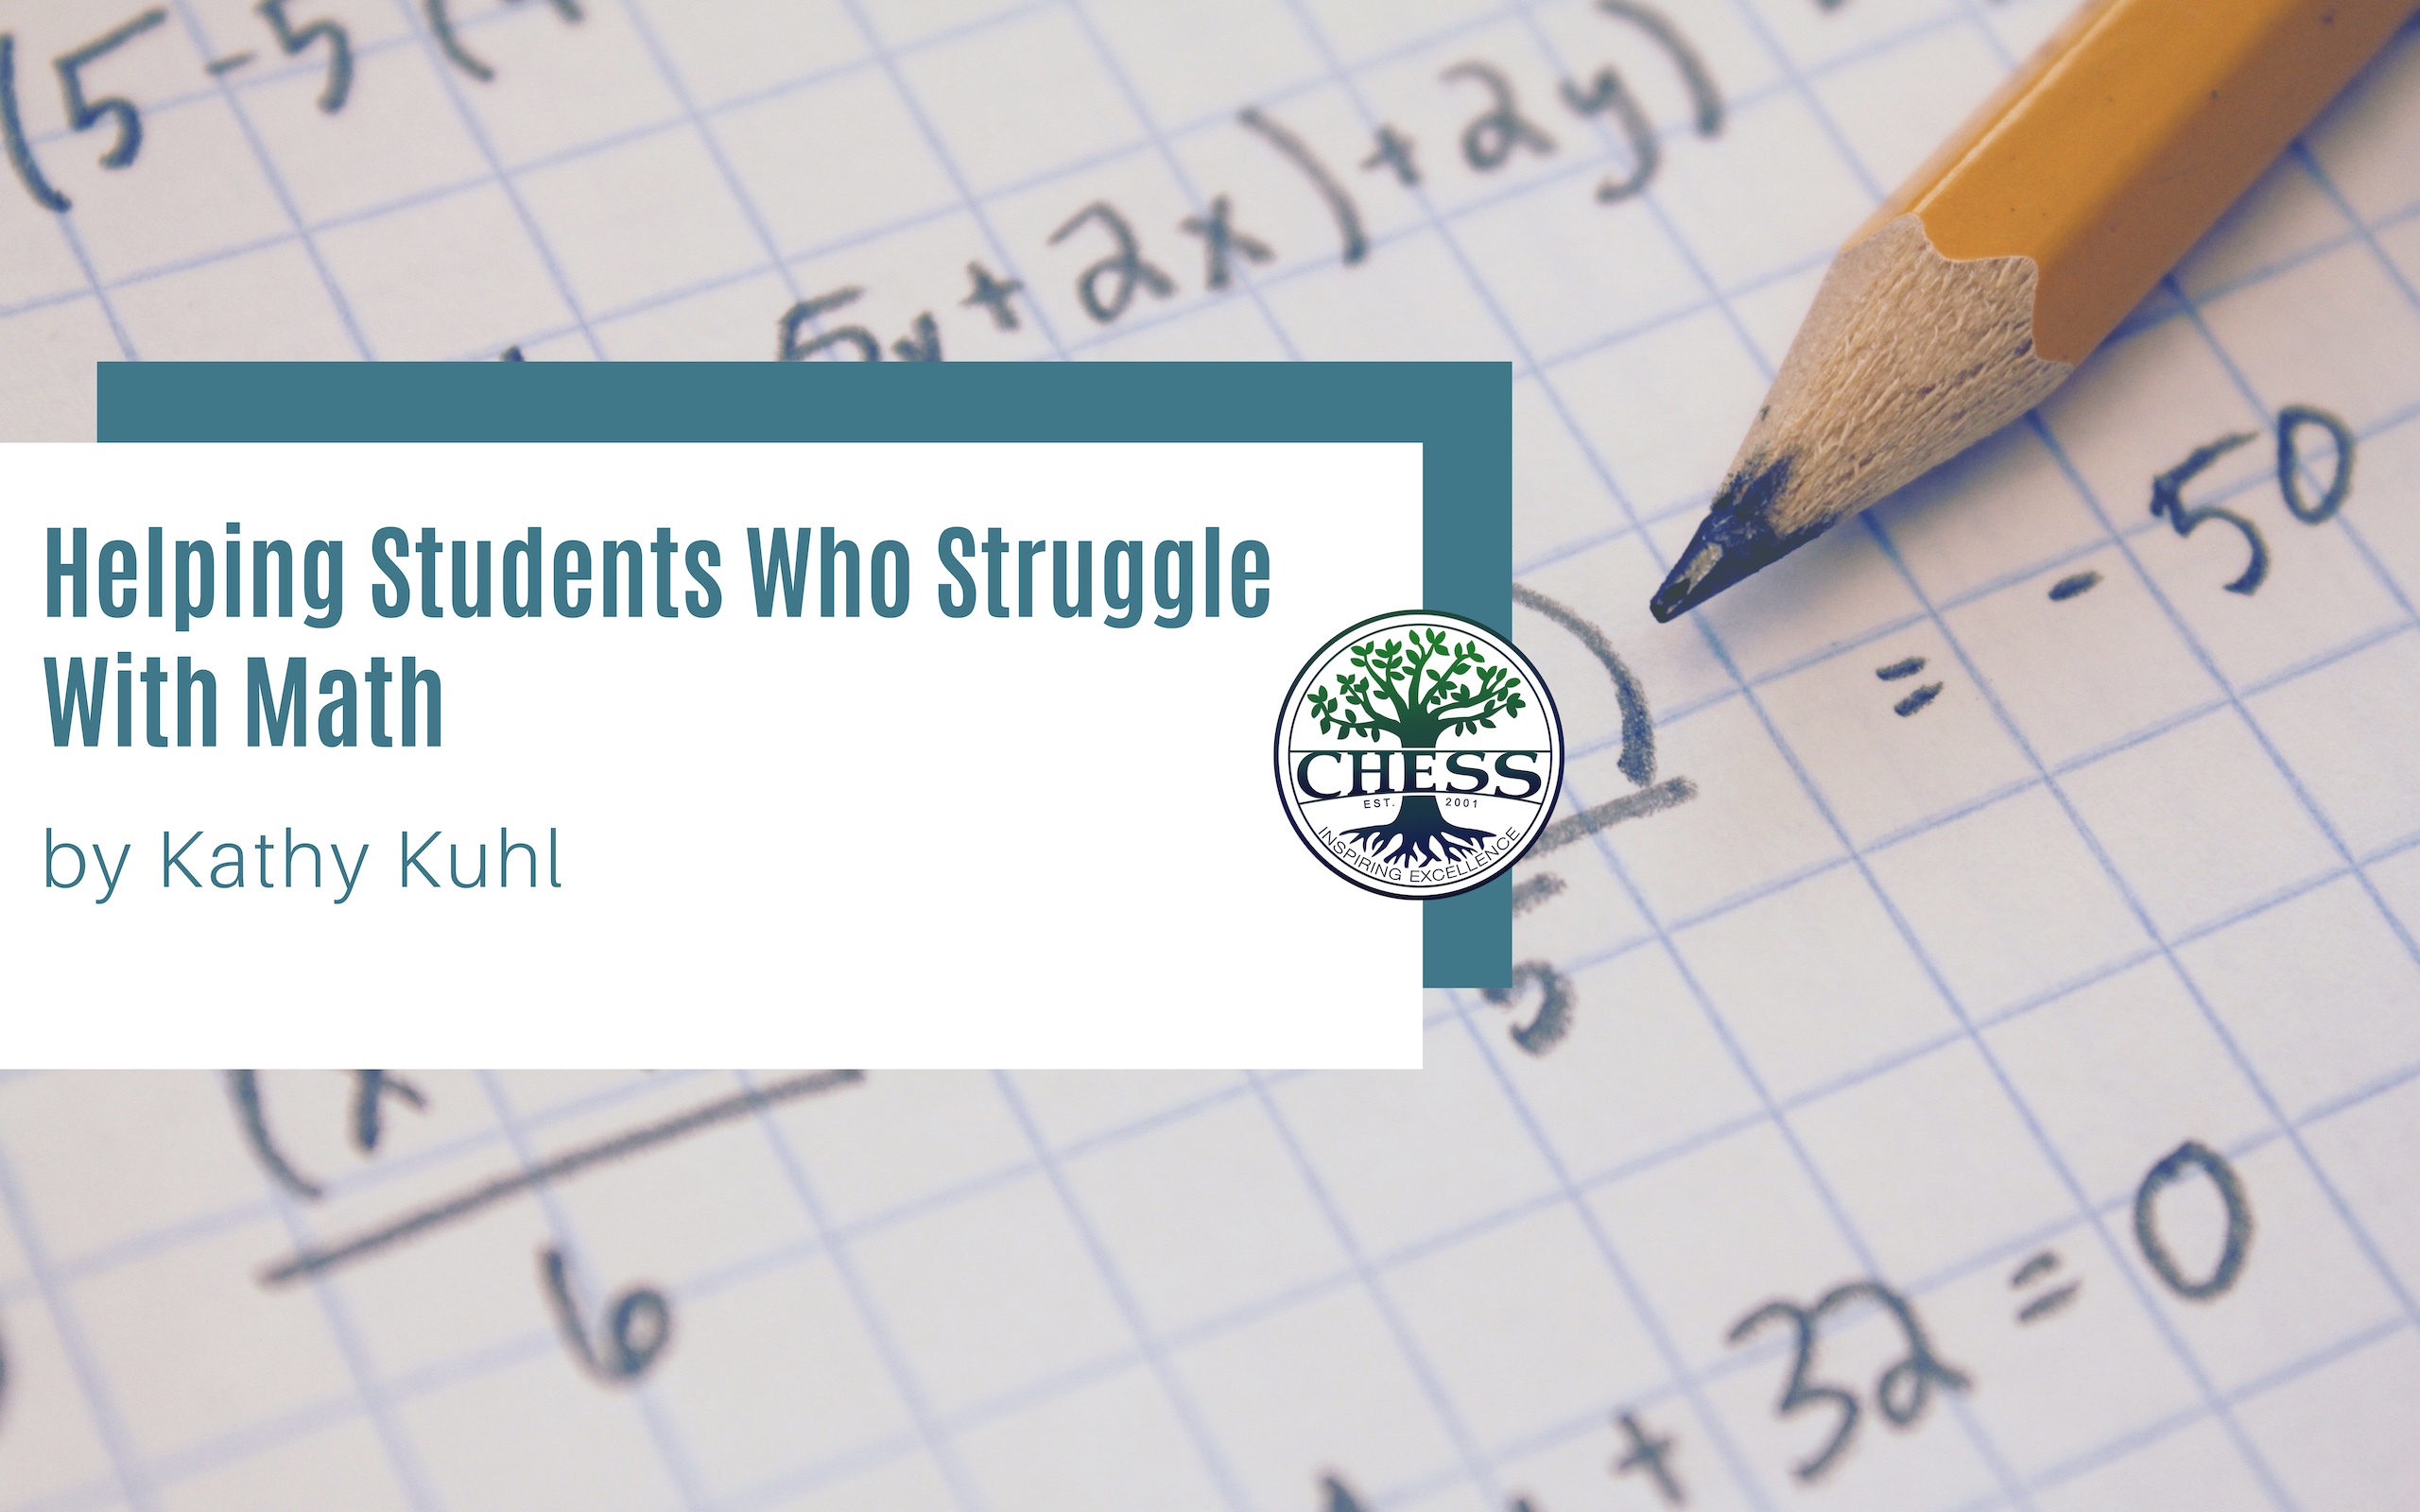 Helping students who struggle with math